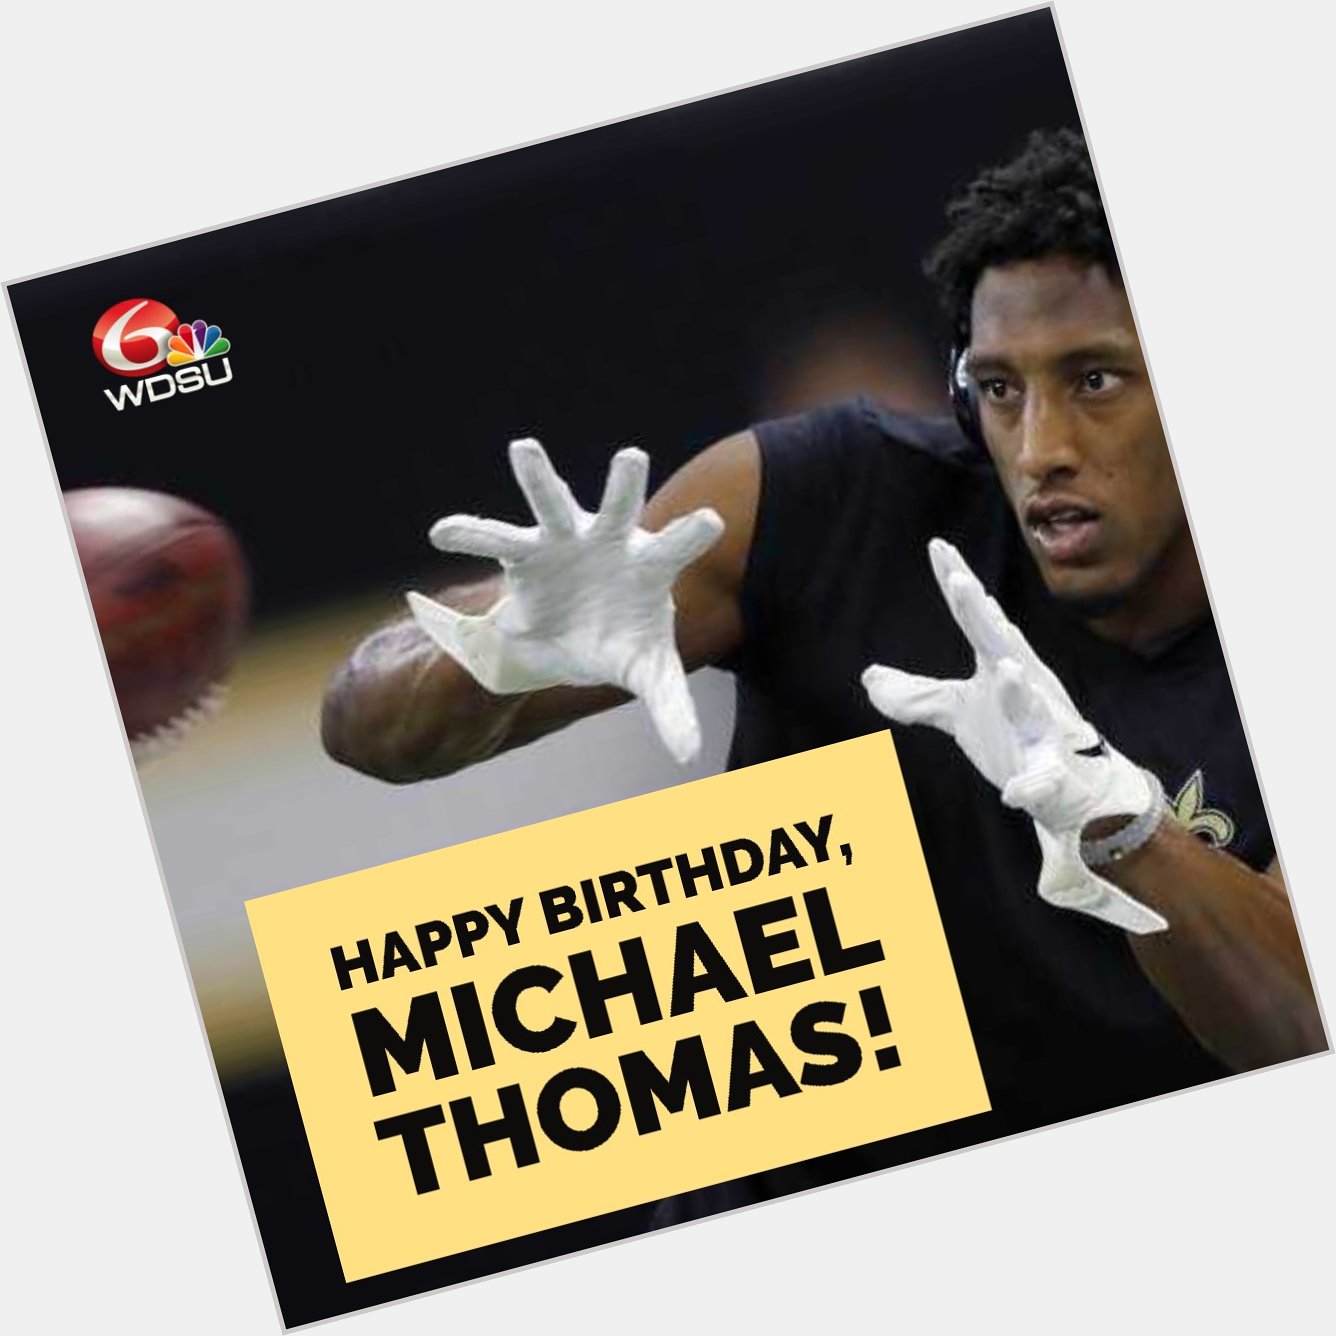 Everyone wish New Orleans Saints wide receiver Michael Thomas a VERY HAPPY BIRTHDAY! 